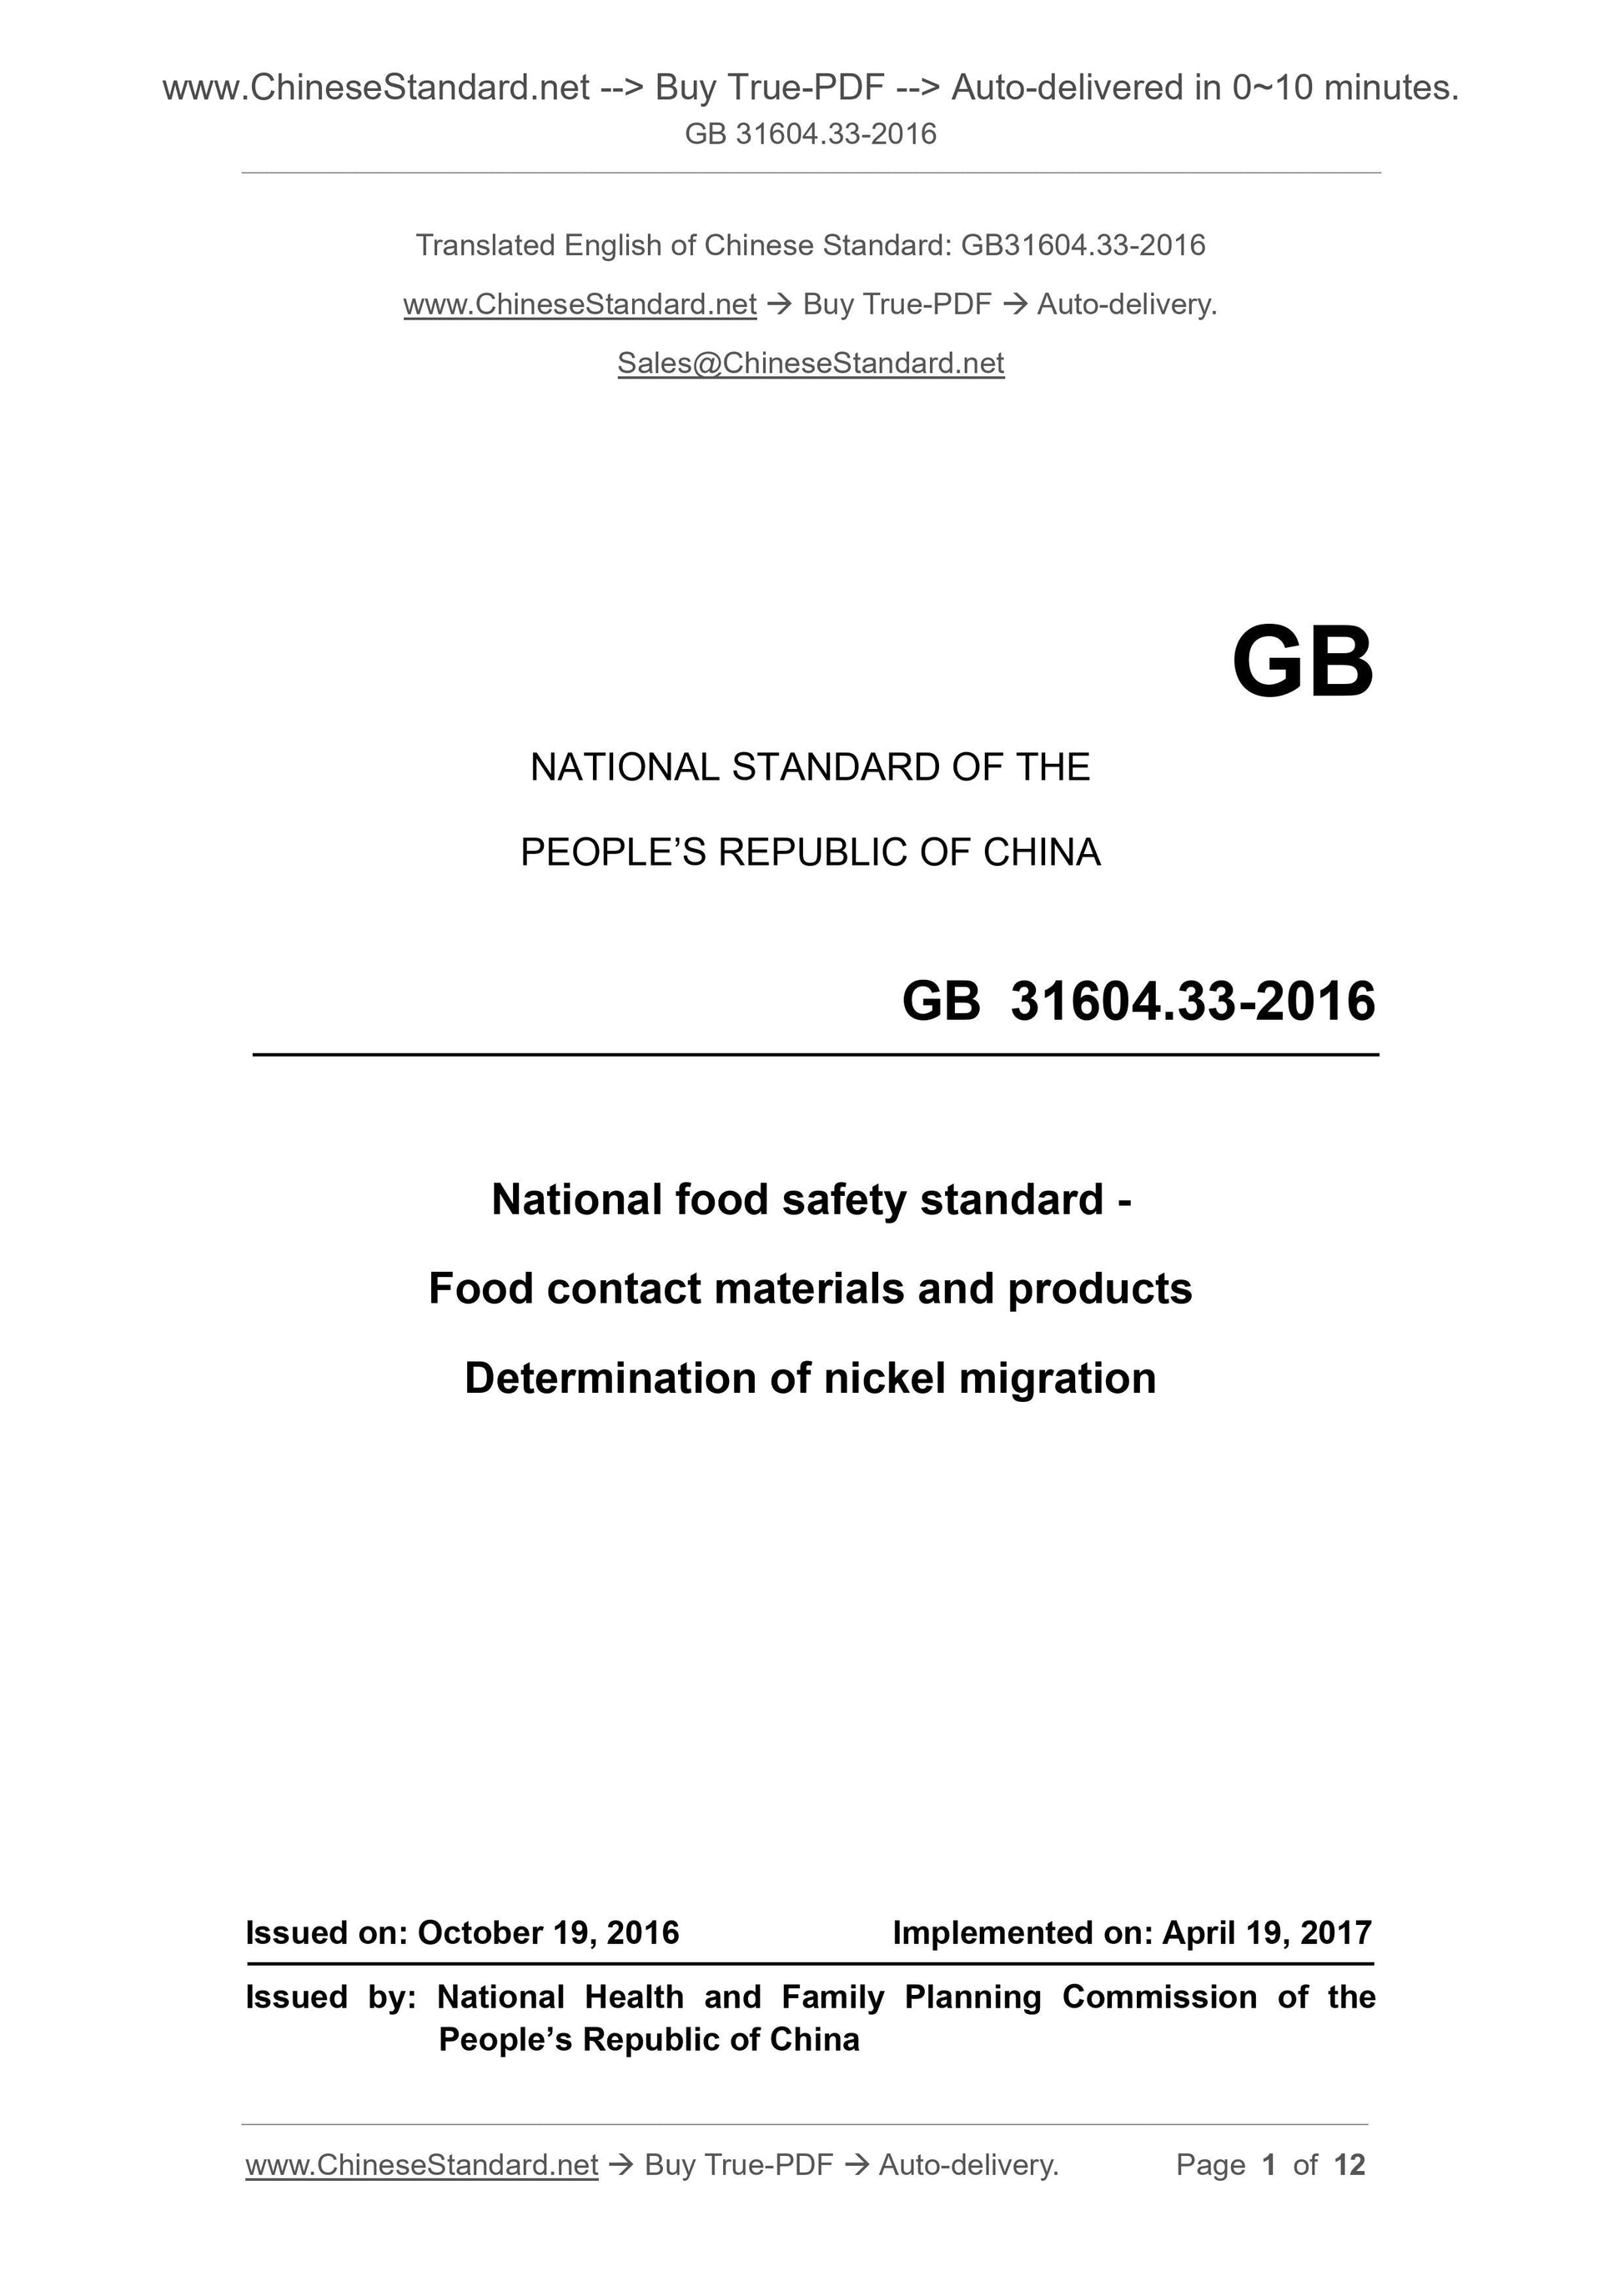 GB 31604.33-2016 Page 1